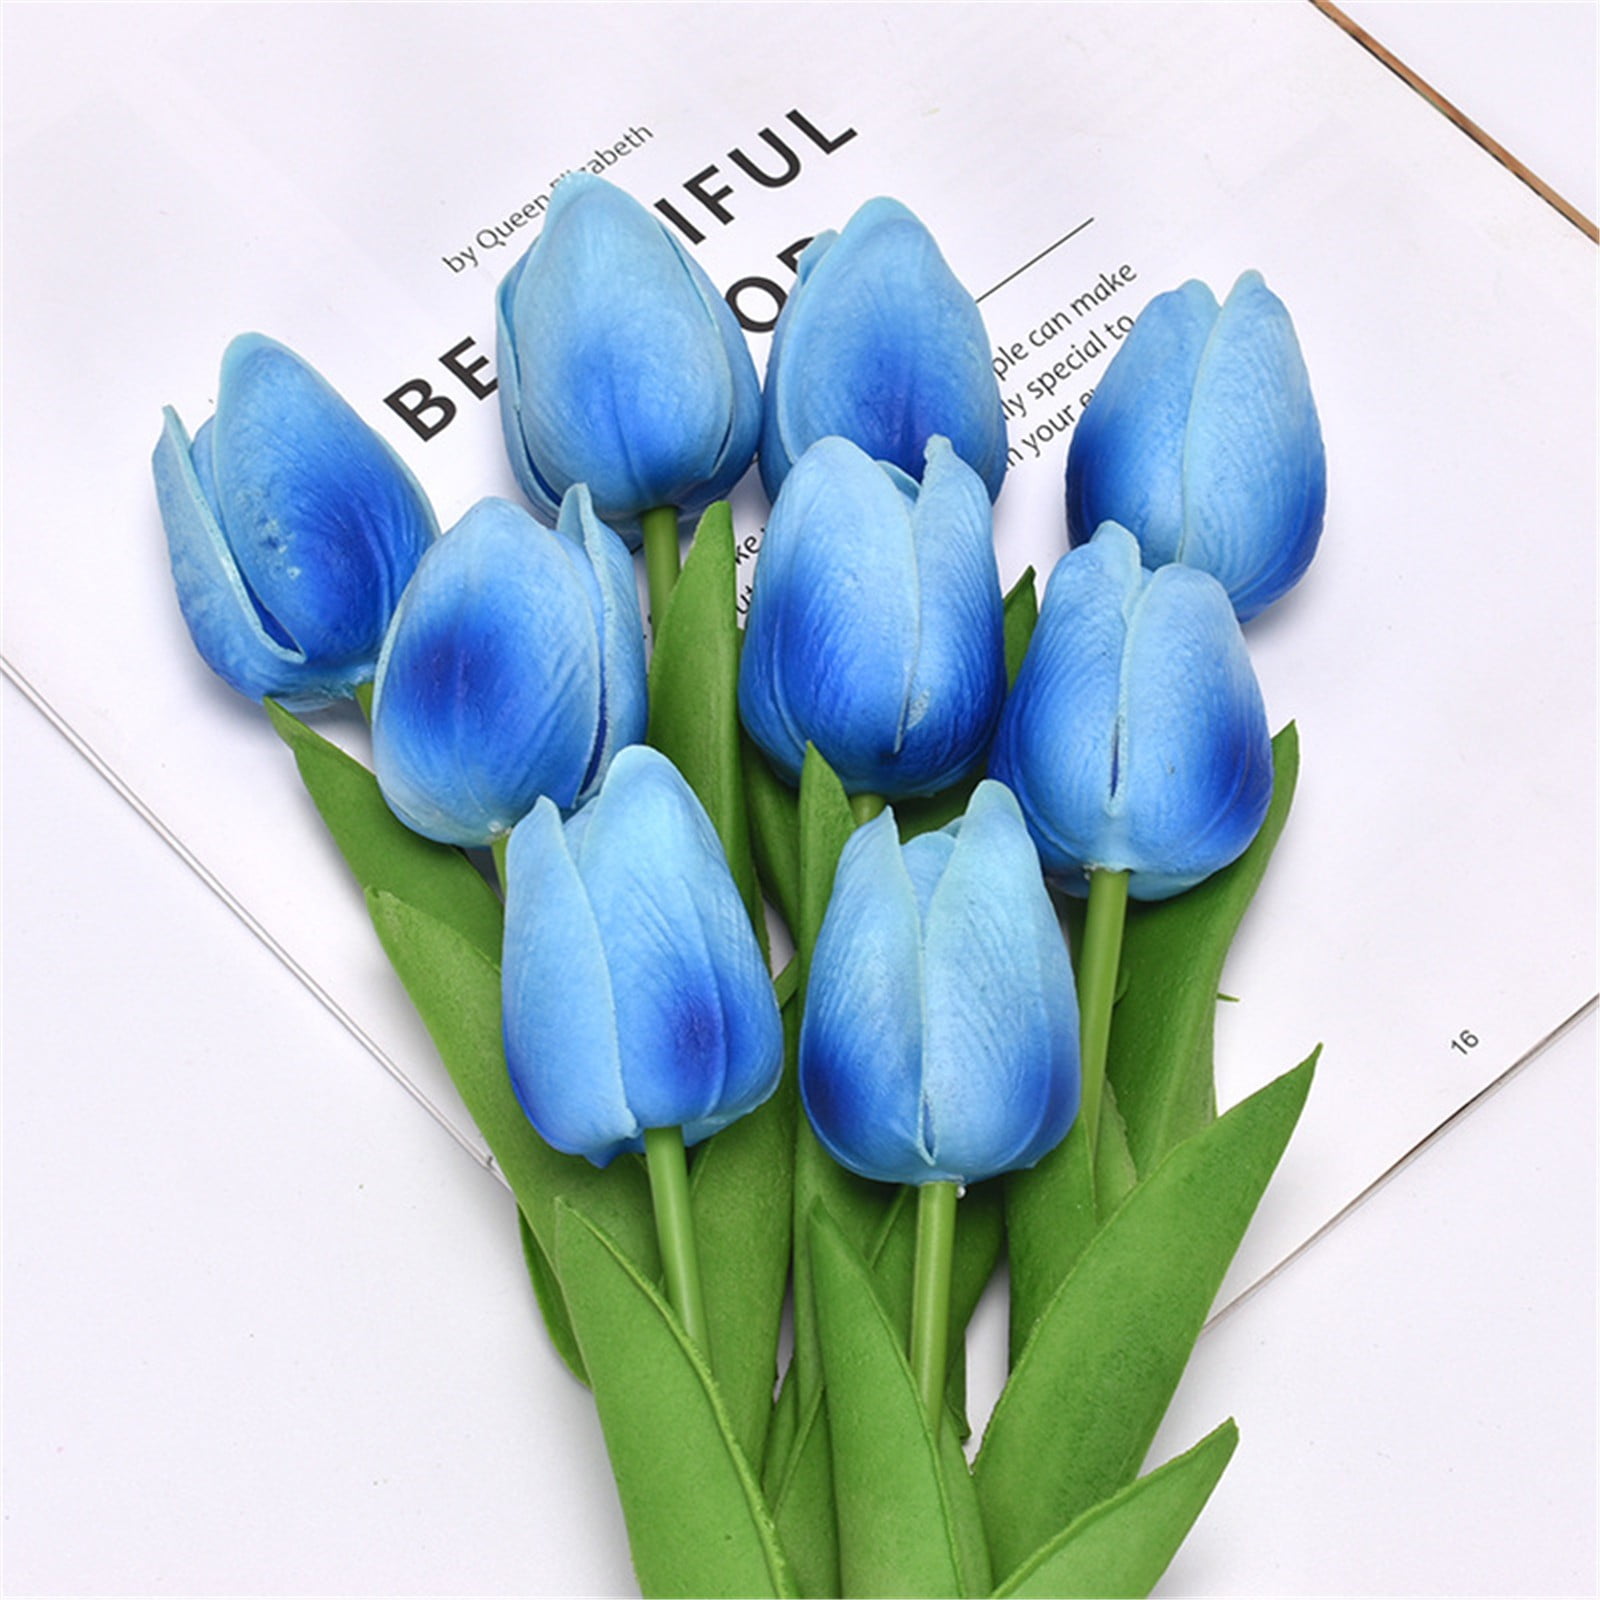 Artificial Flower Bouquet Tulip Real Touch Bridal Wedding Supply Home Decor 10pc 